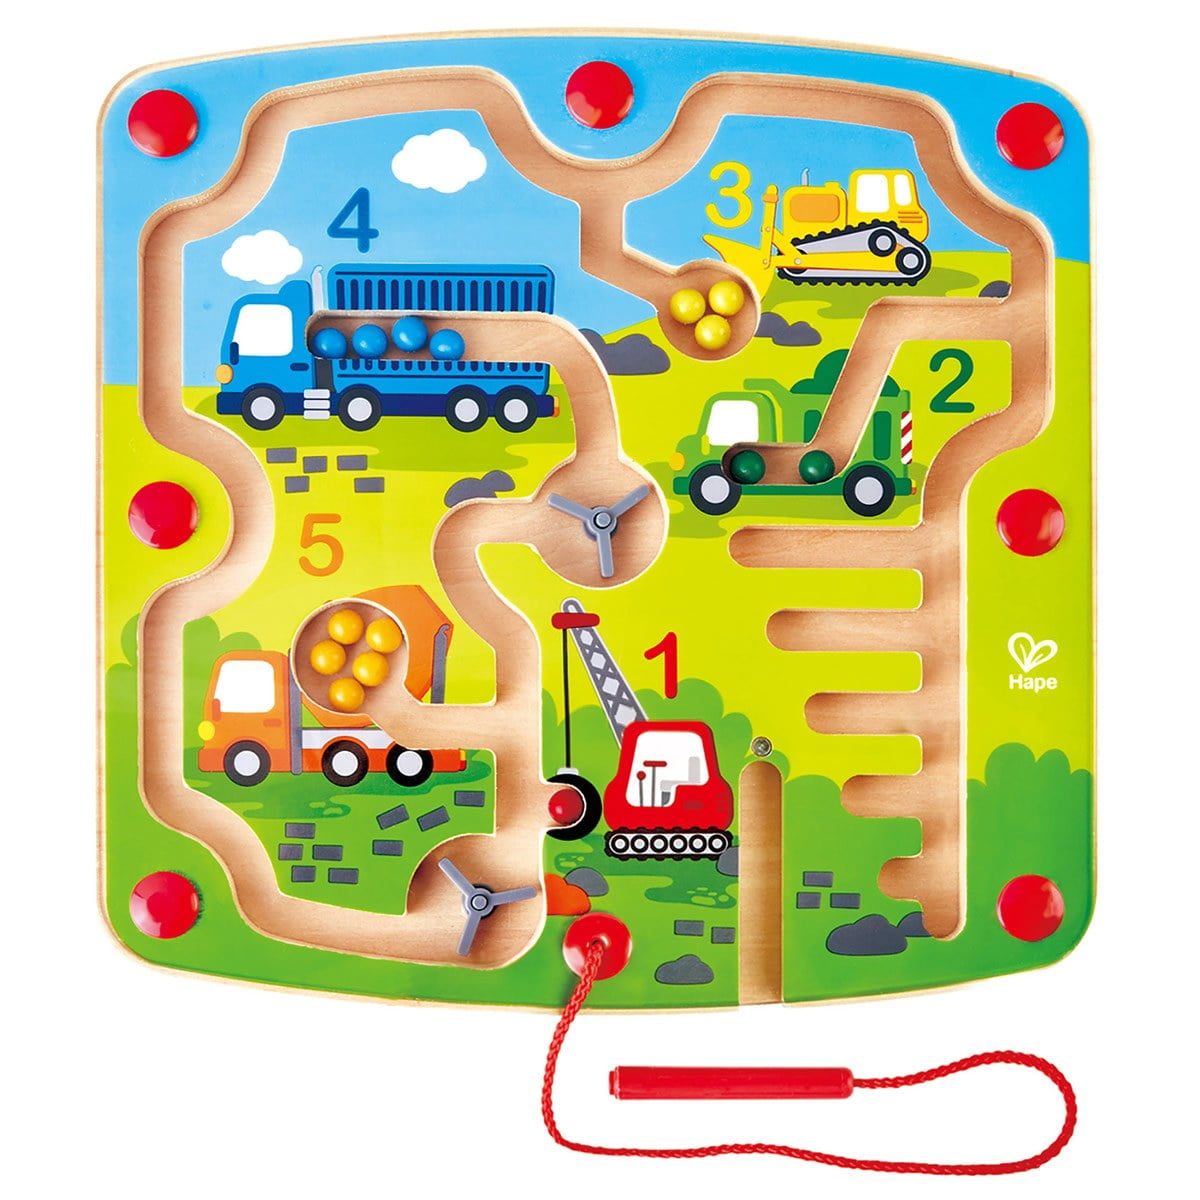 Details about   Children's Magnetic wooden maze game